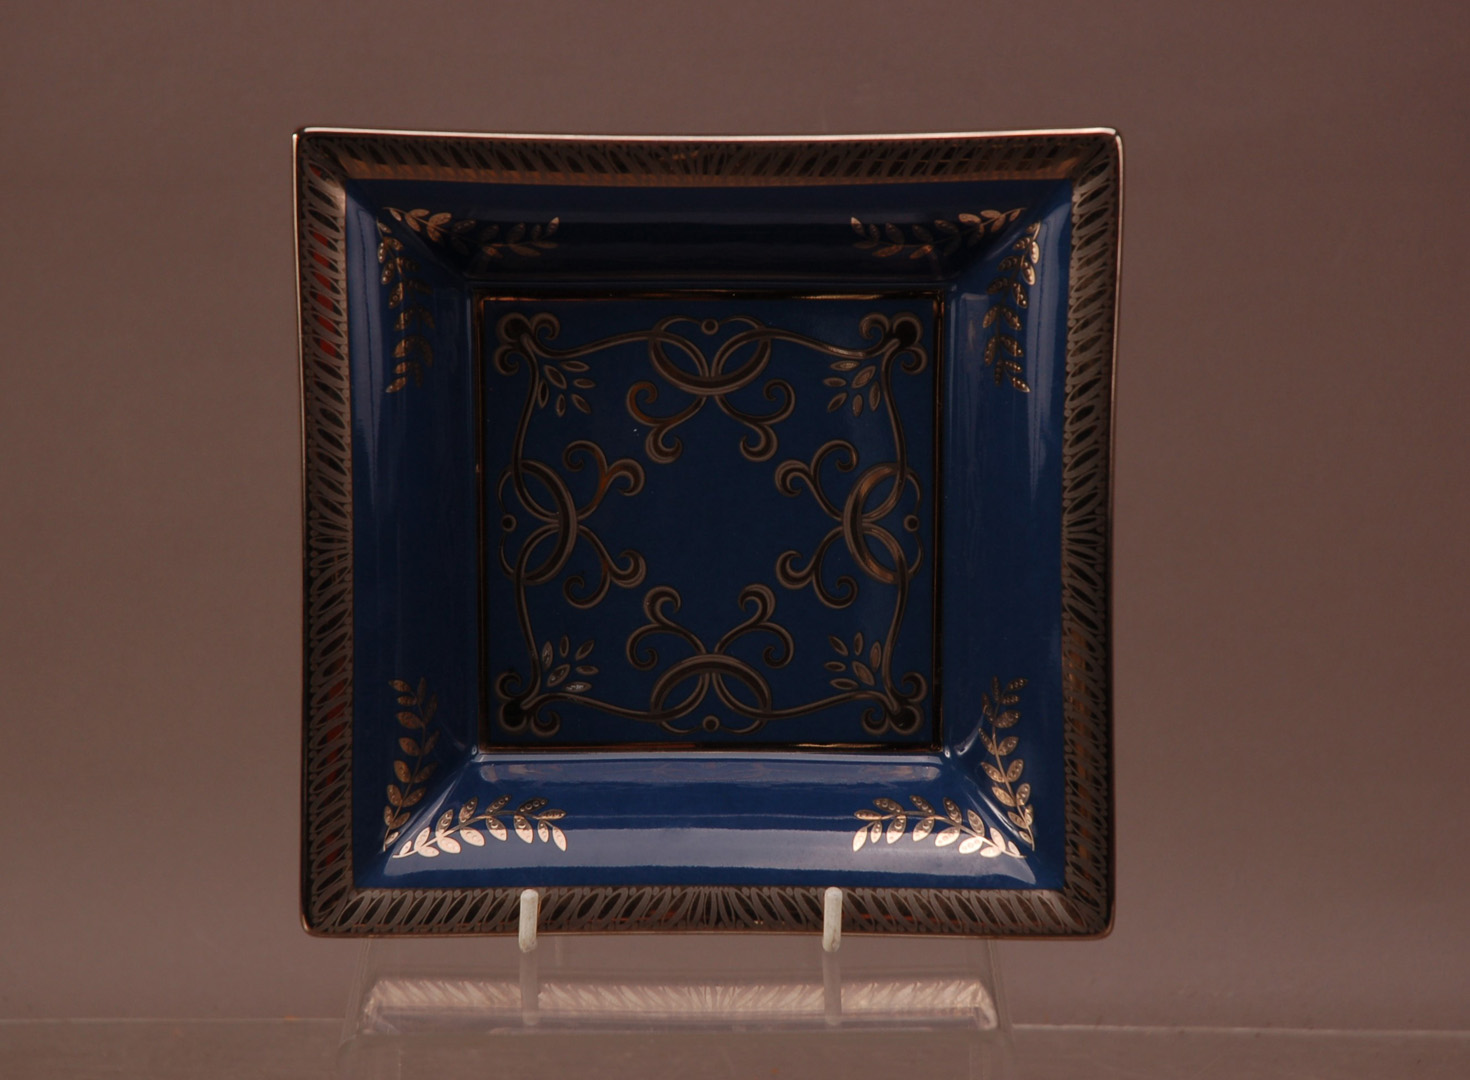 A Patek Philippe rare porcelain square bowl by Limoges, with decoration inspired by a Patek Philippe